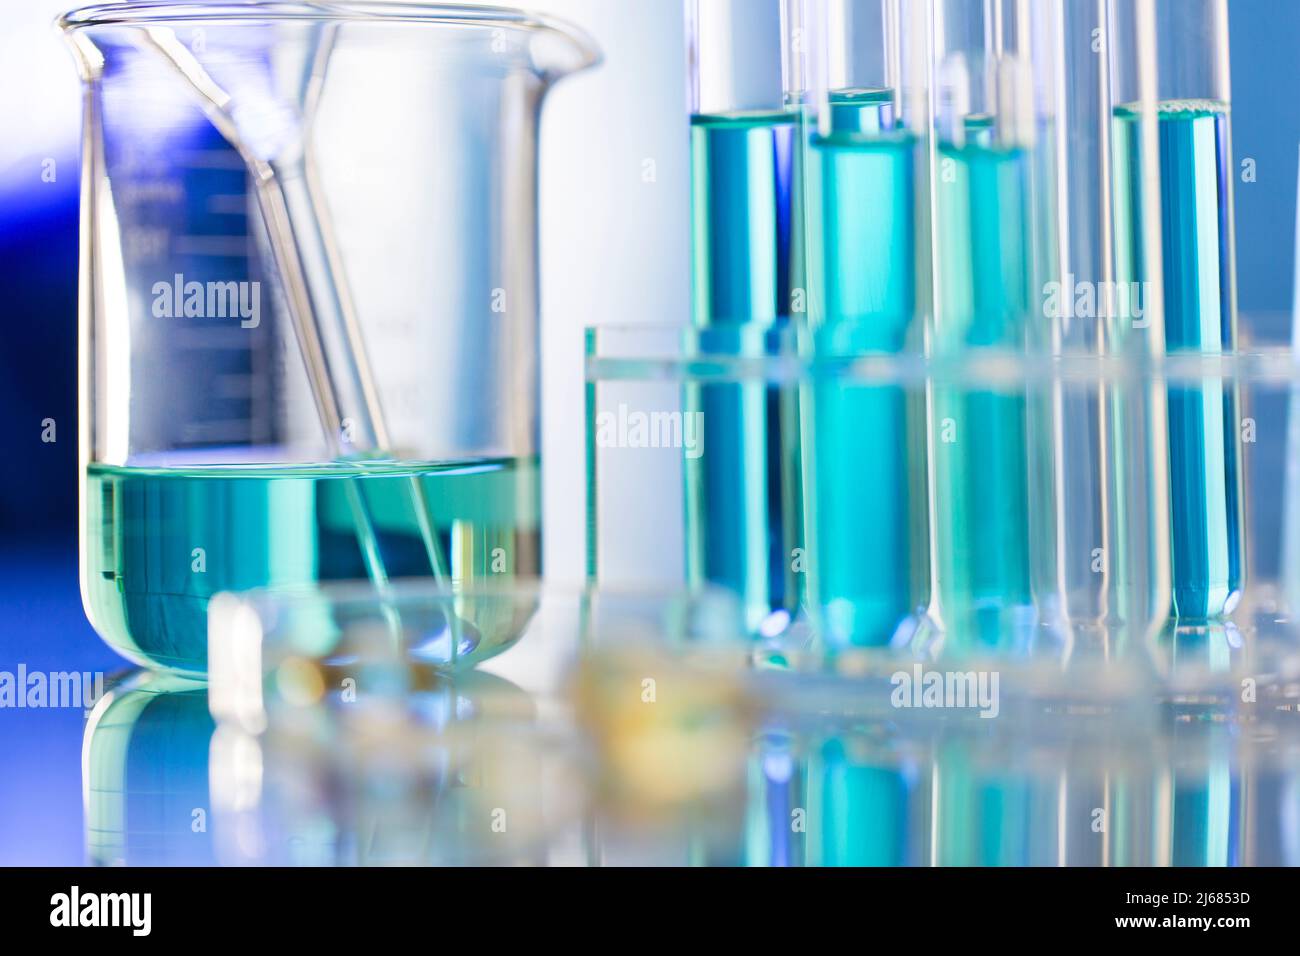 Blue chemical reagent in the beaker with glass funnel and test tube rack - stock photo Stock Photo